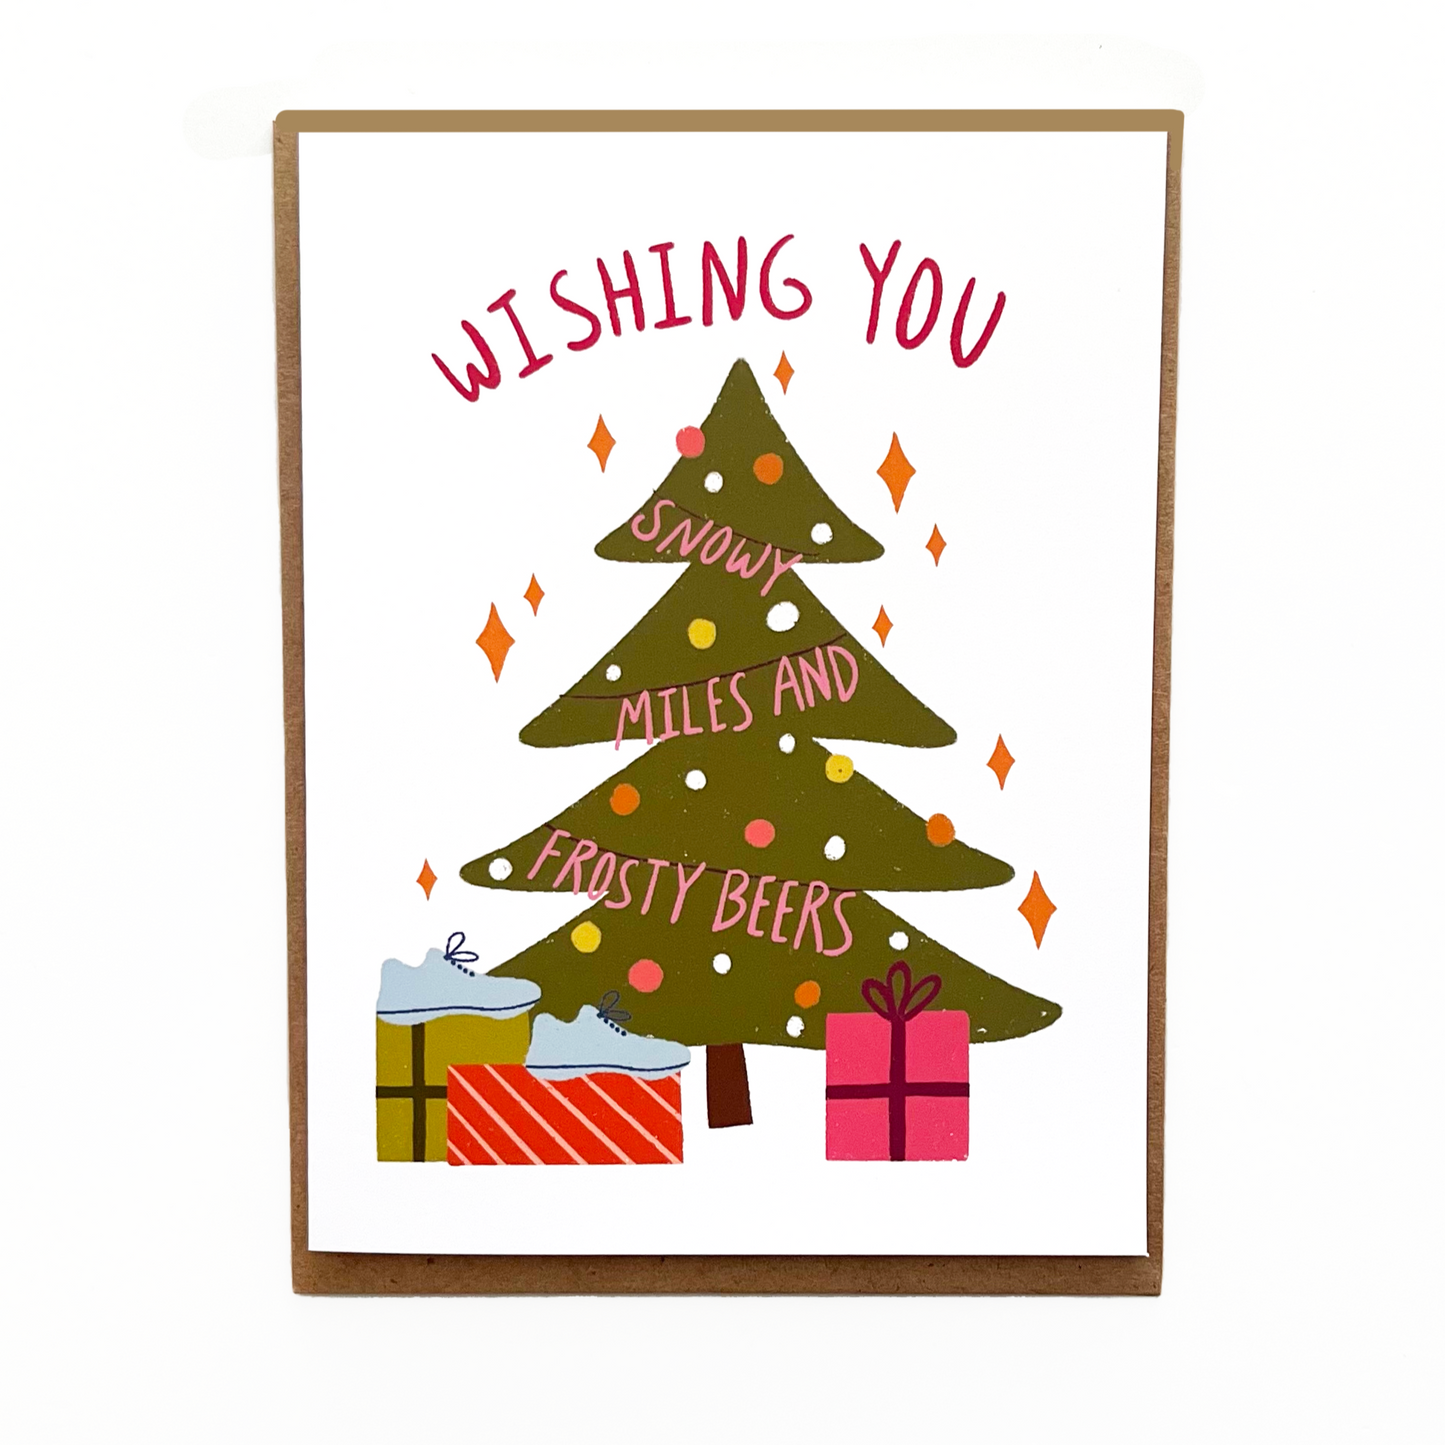 wishing you snowy miles and frosty beers card